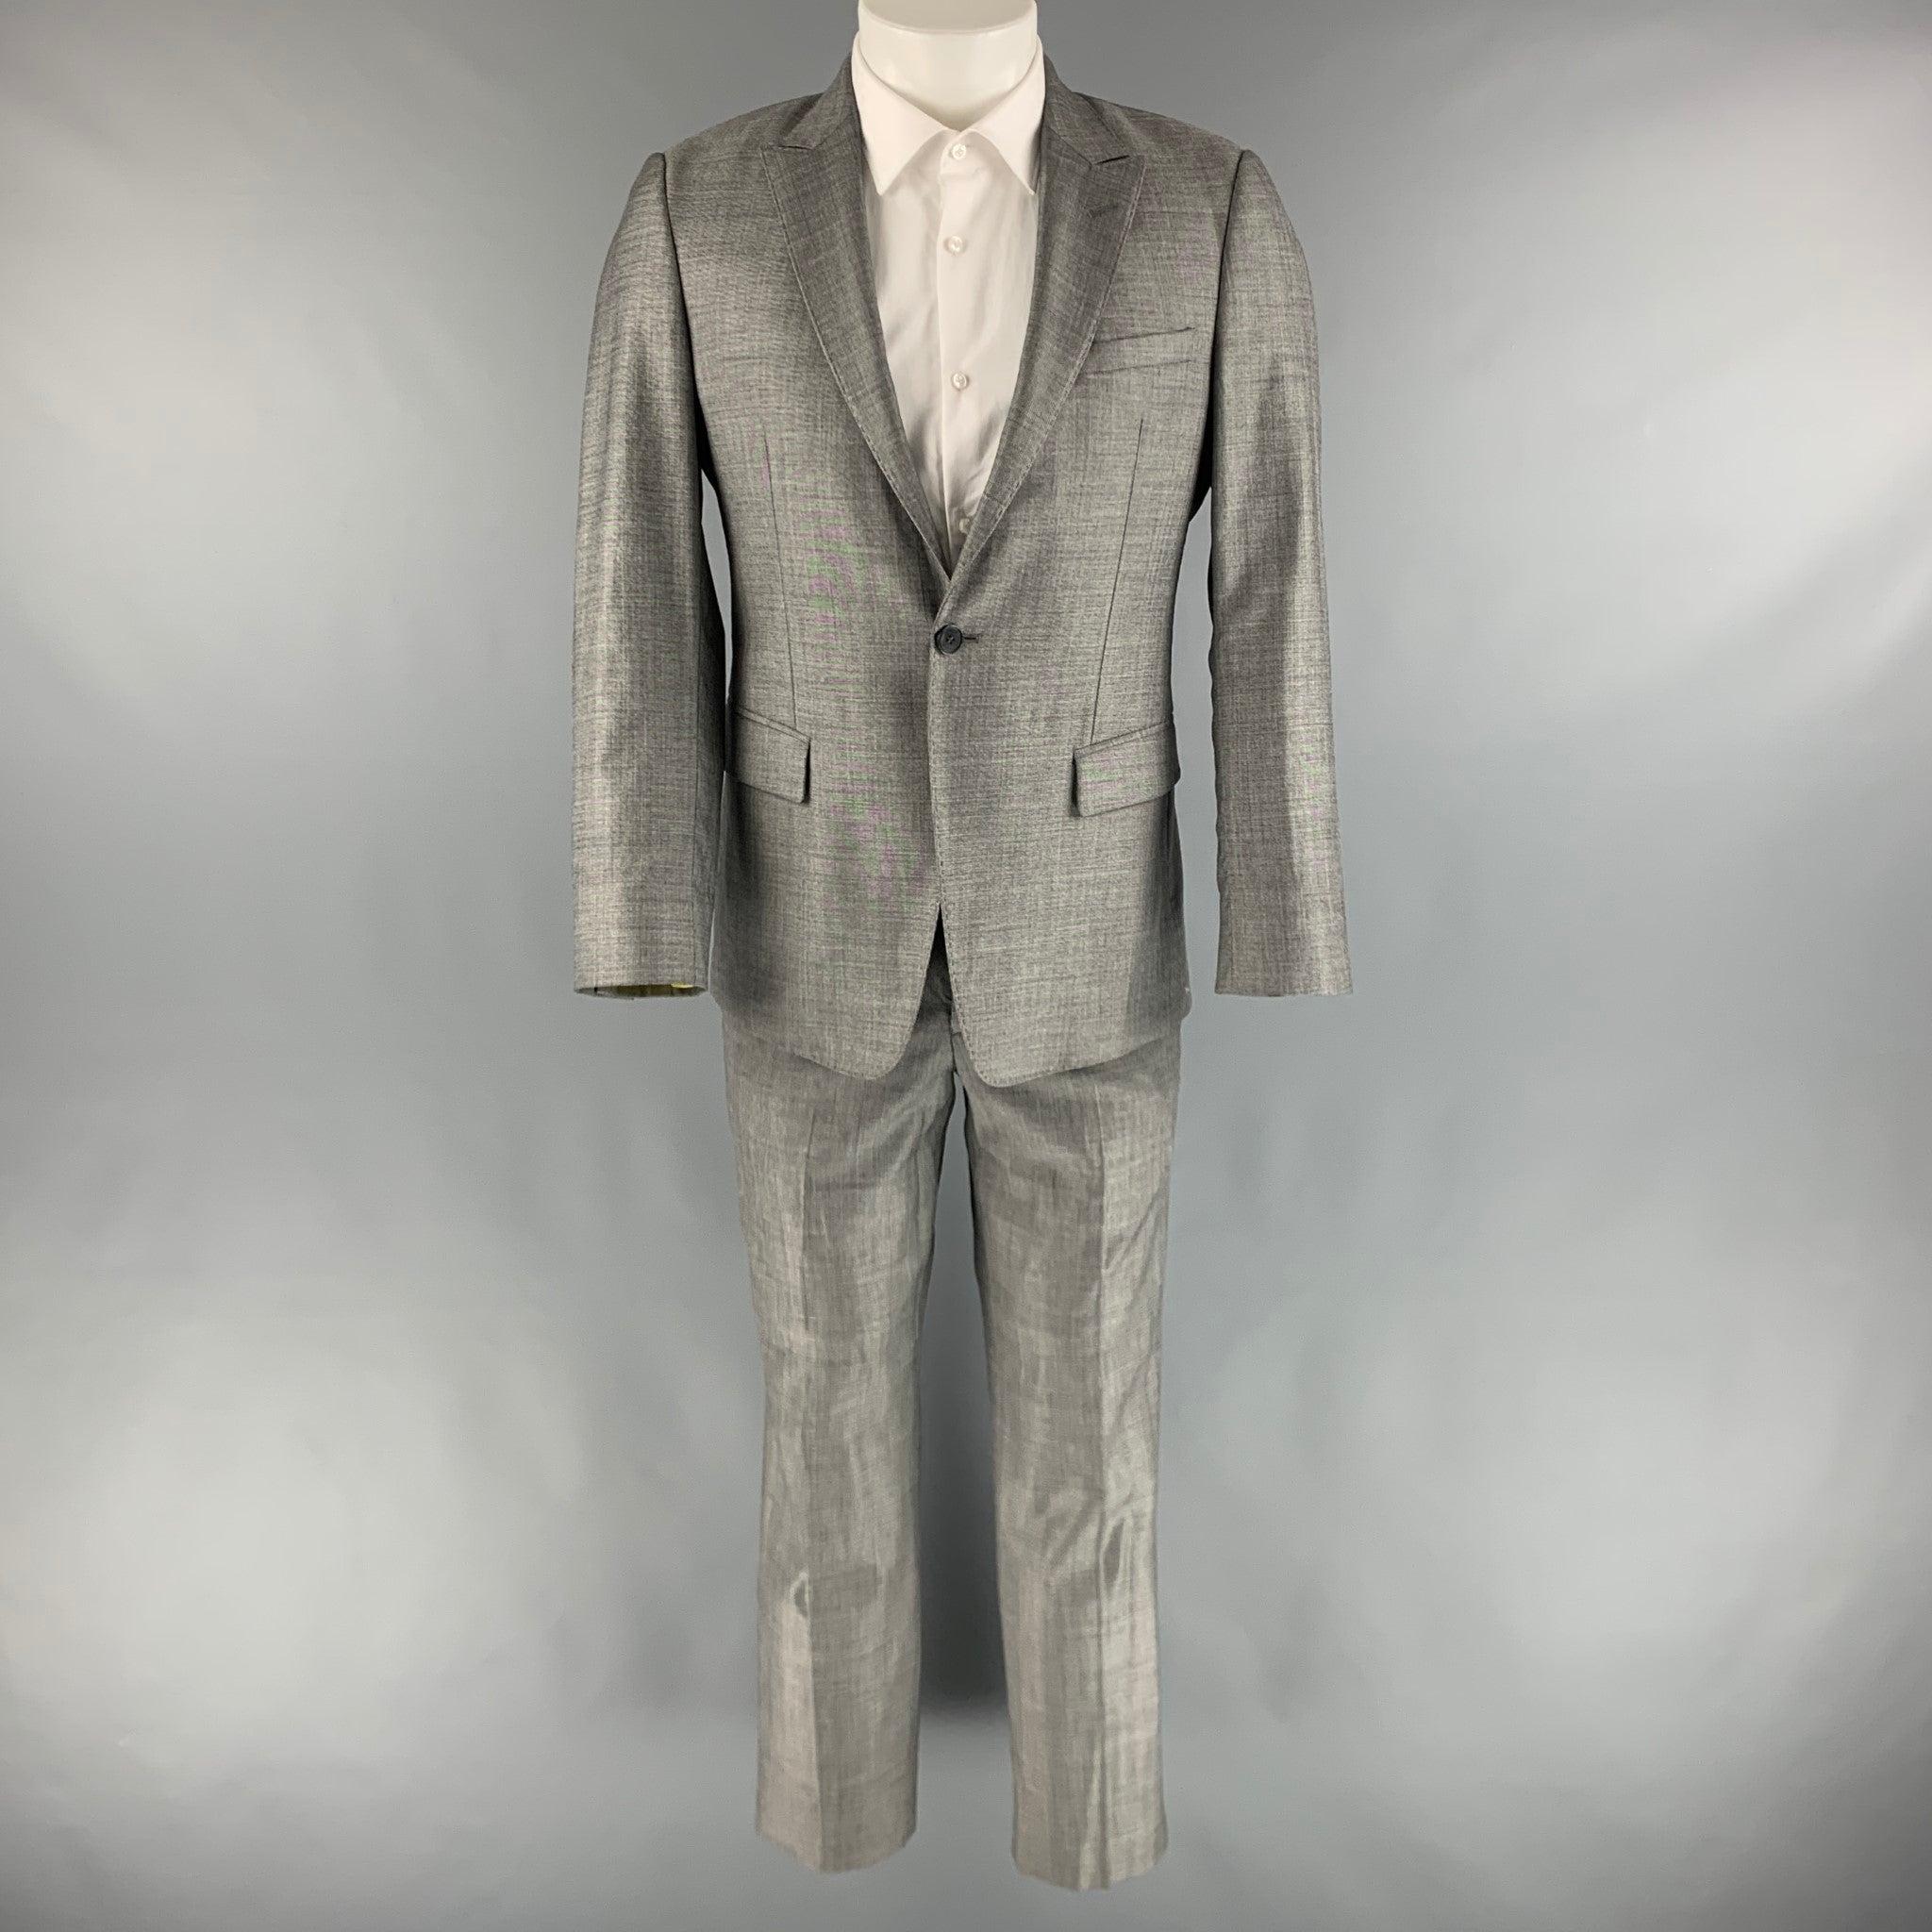 EMPORIO ARMANI suit comes in a grey wool and silk woven material with a full liner and includes a single breasted, single button sport coat with a peak lapel and a matching flat front trousers. Made in Italy.
Excellent Pre-Owned Condition. 